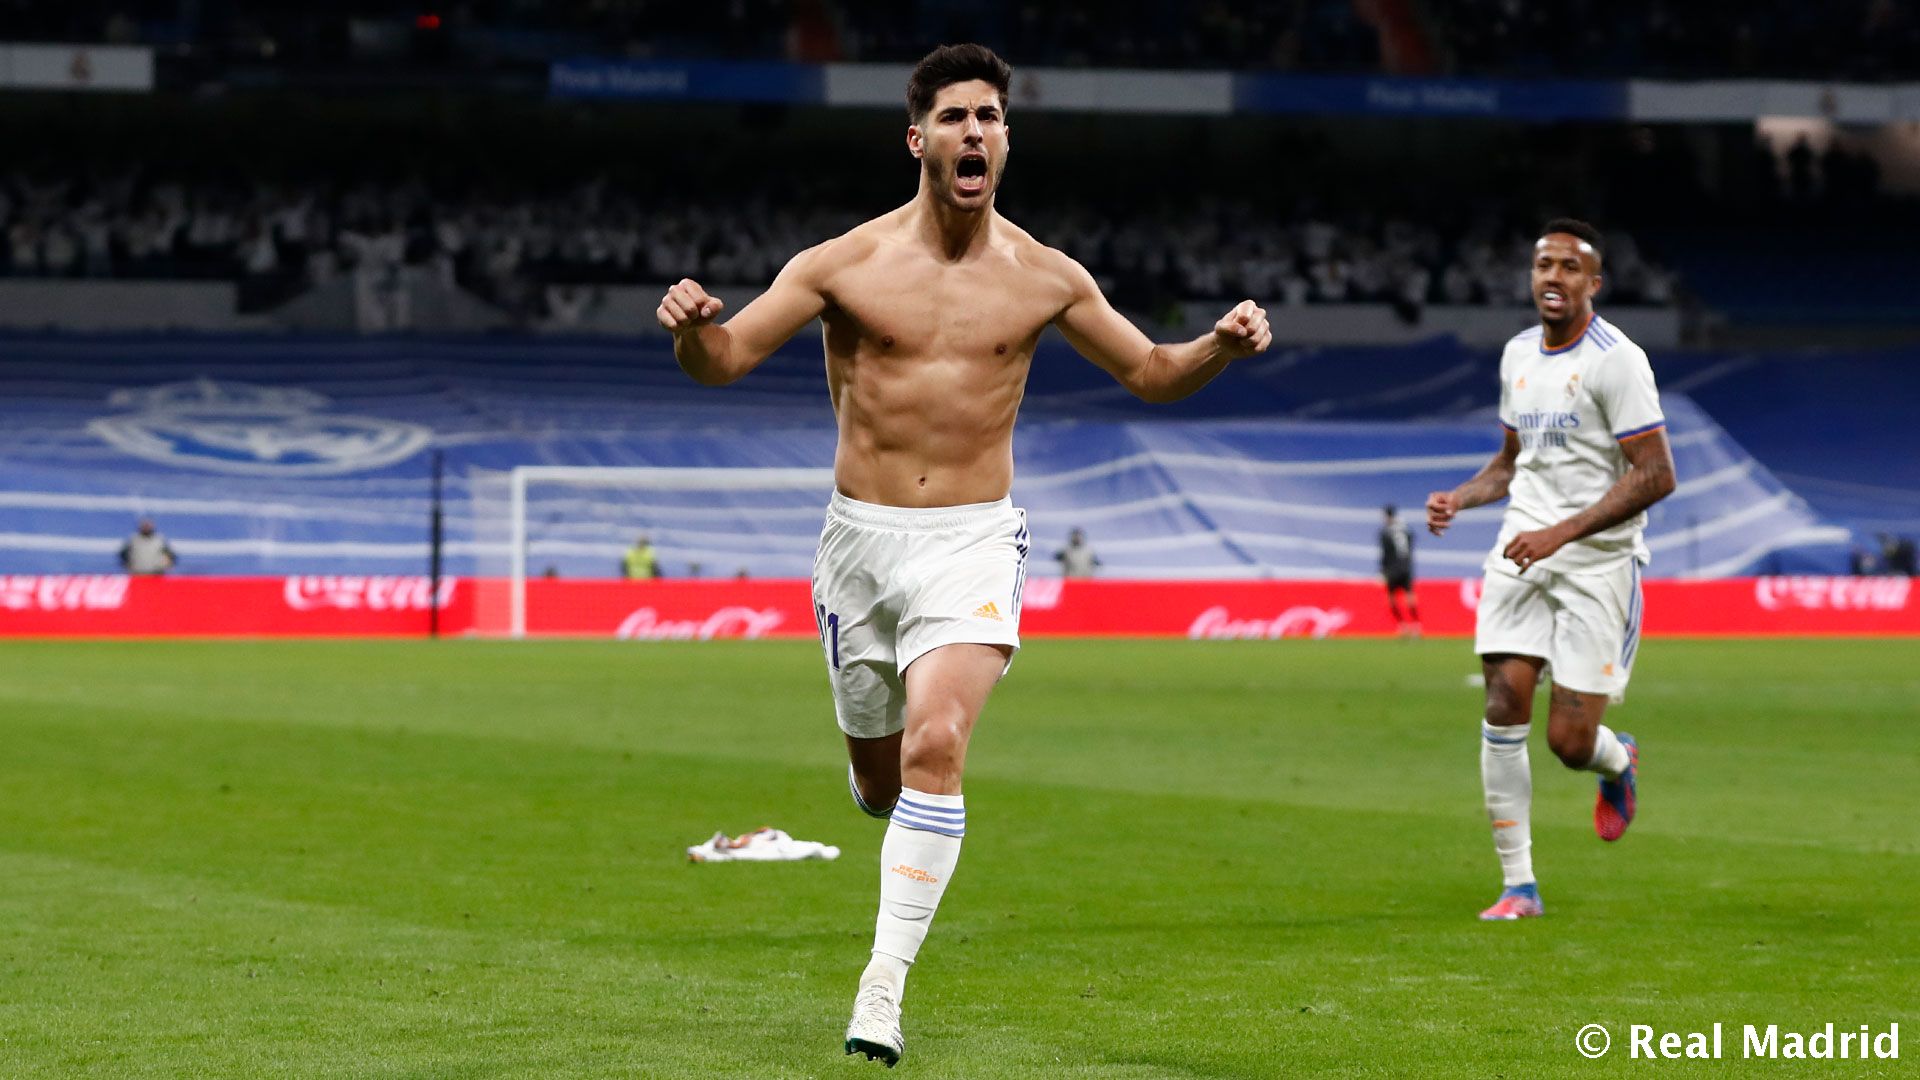 Asensio stunner helps Real Madrid extend lead at the top